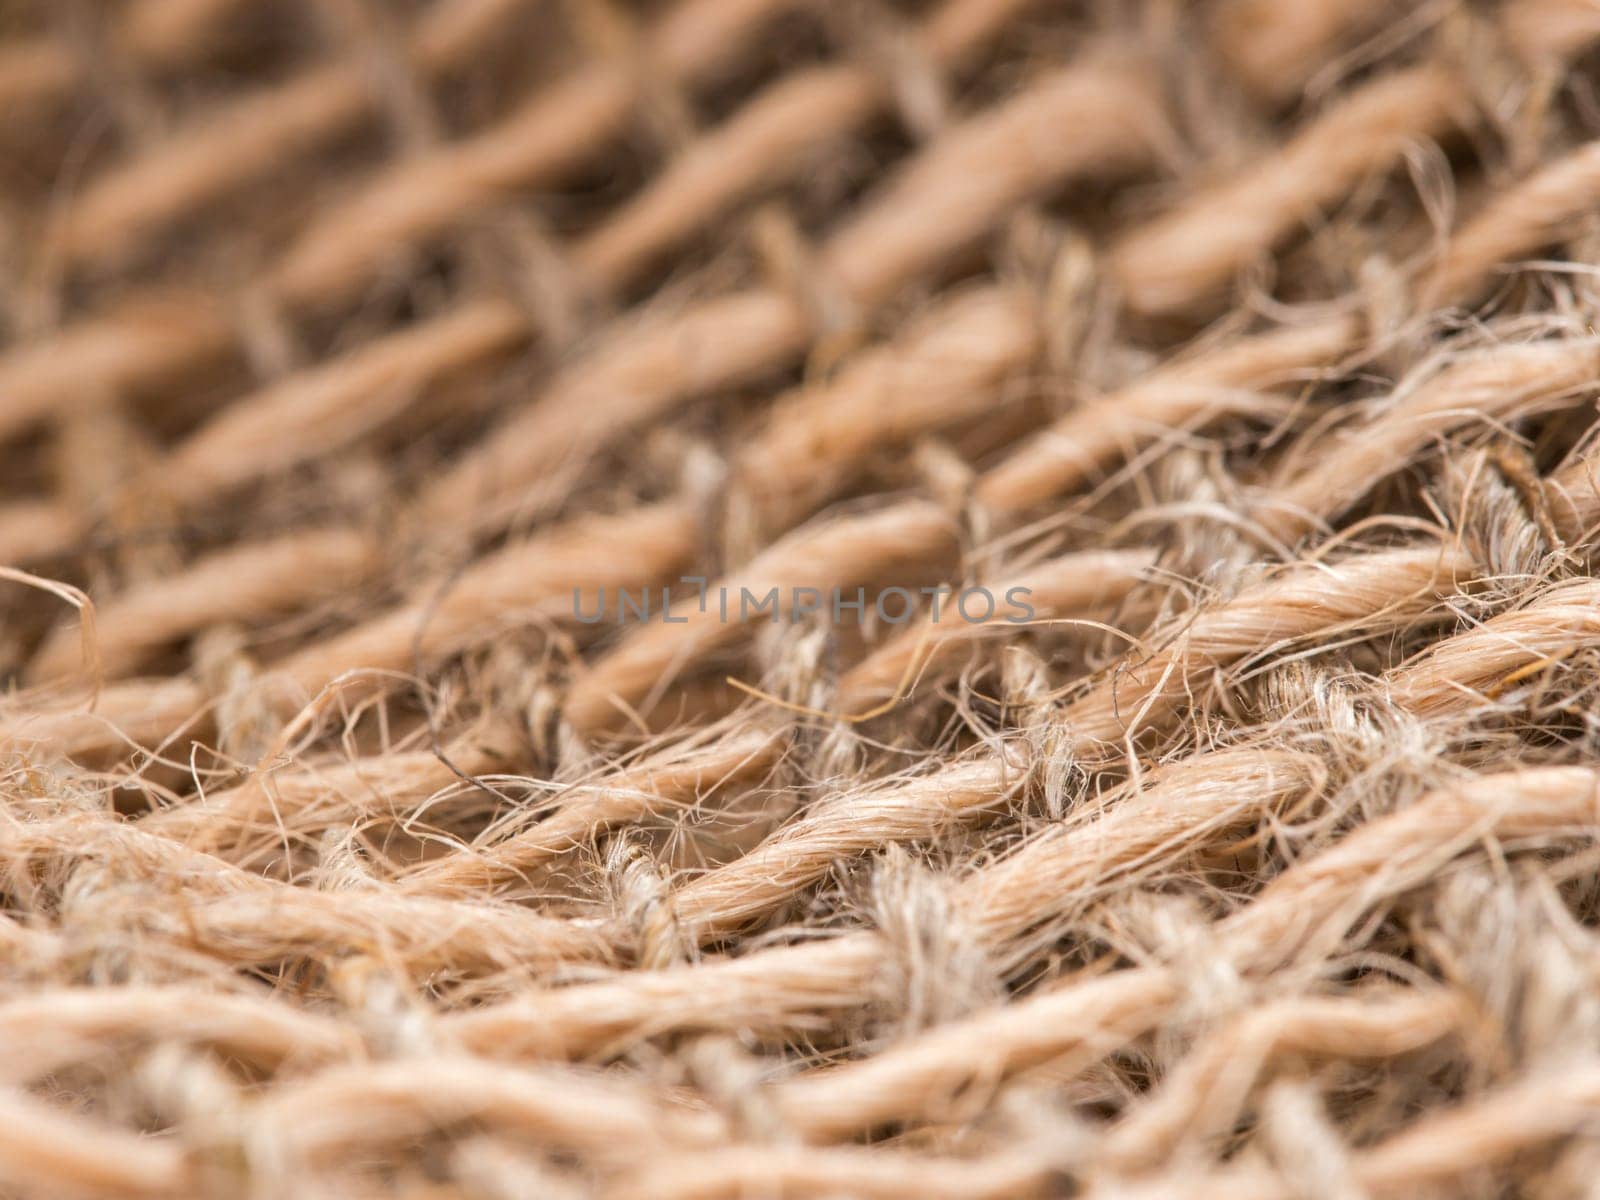 Skein of jute twine on sacking. Clew of natural rope. Close up